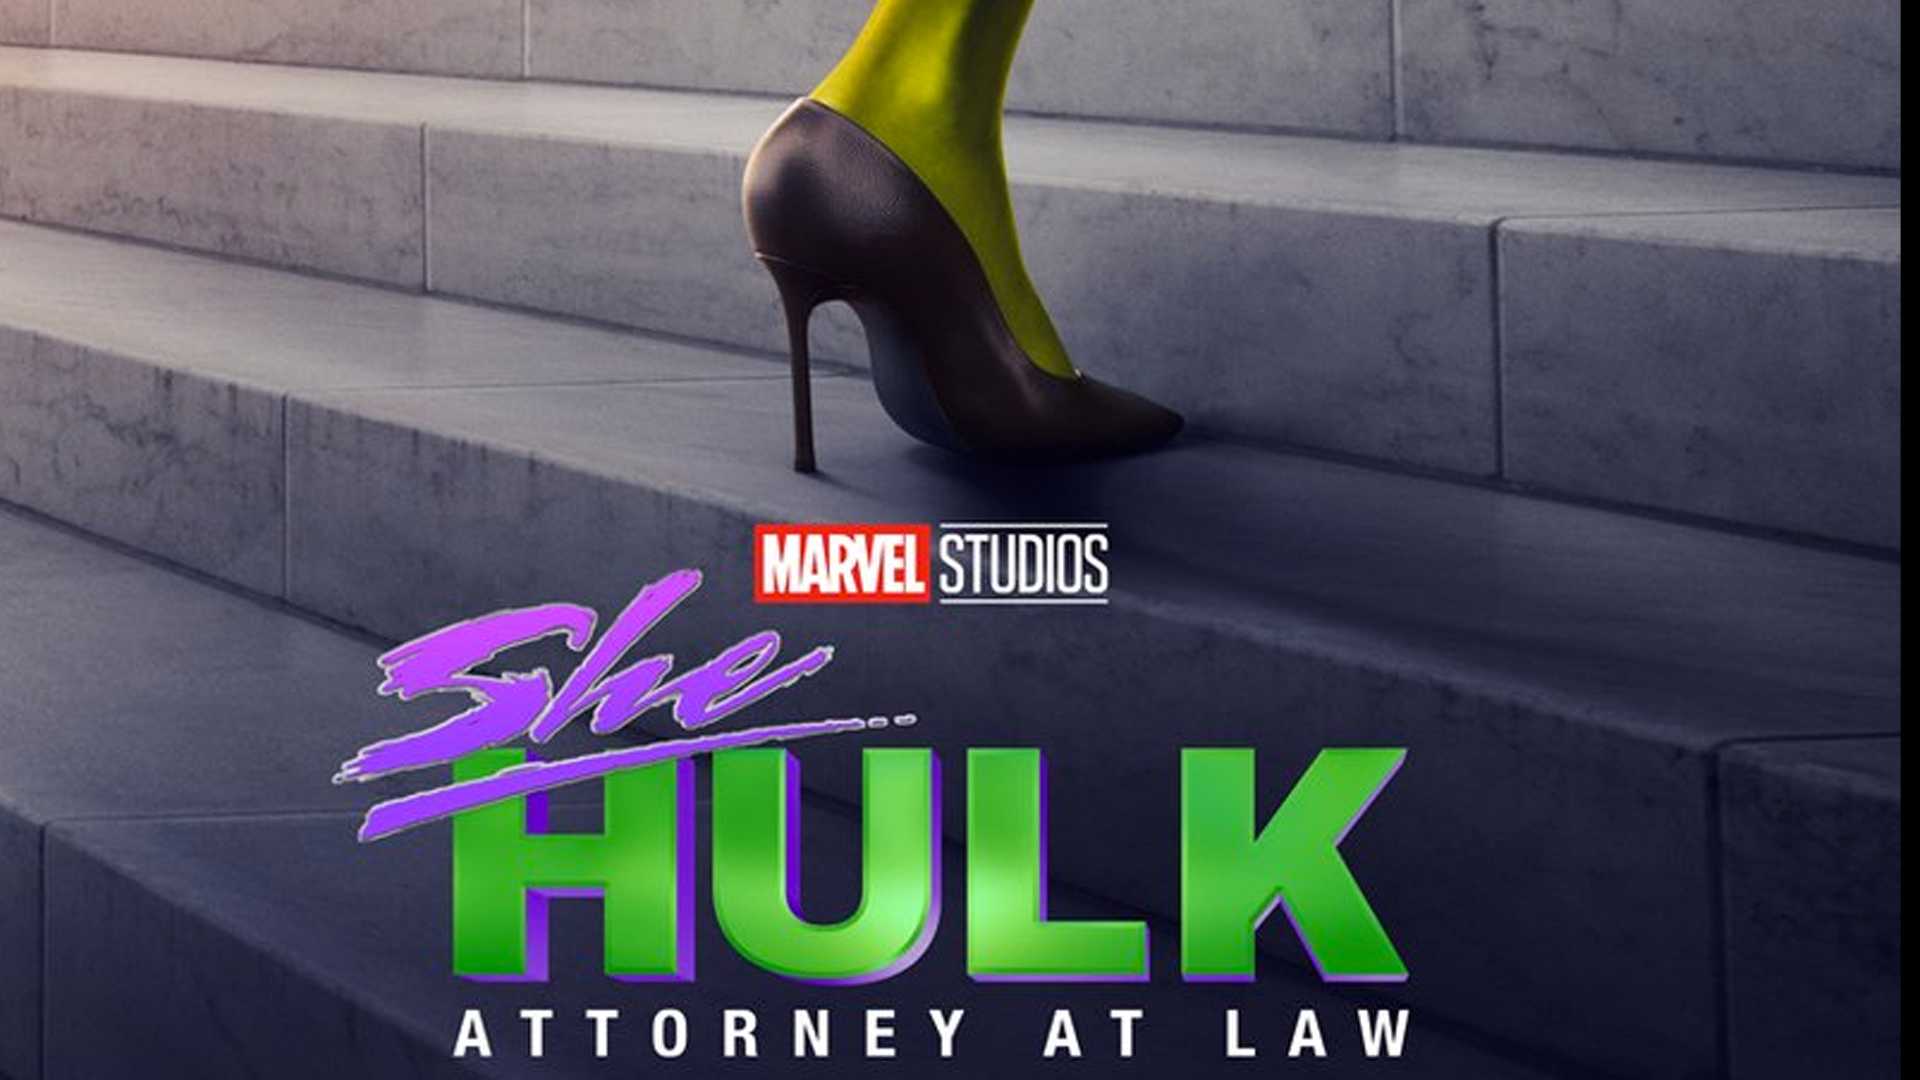 She-Hulk: Attorney at Law gets new character posters and a funny promo clip that questions Captain America's virginity